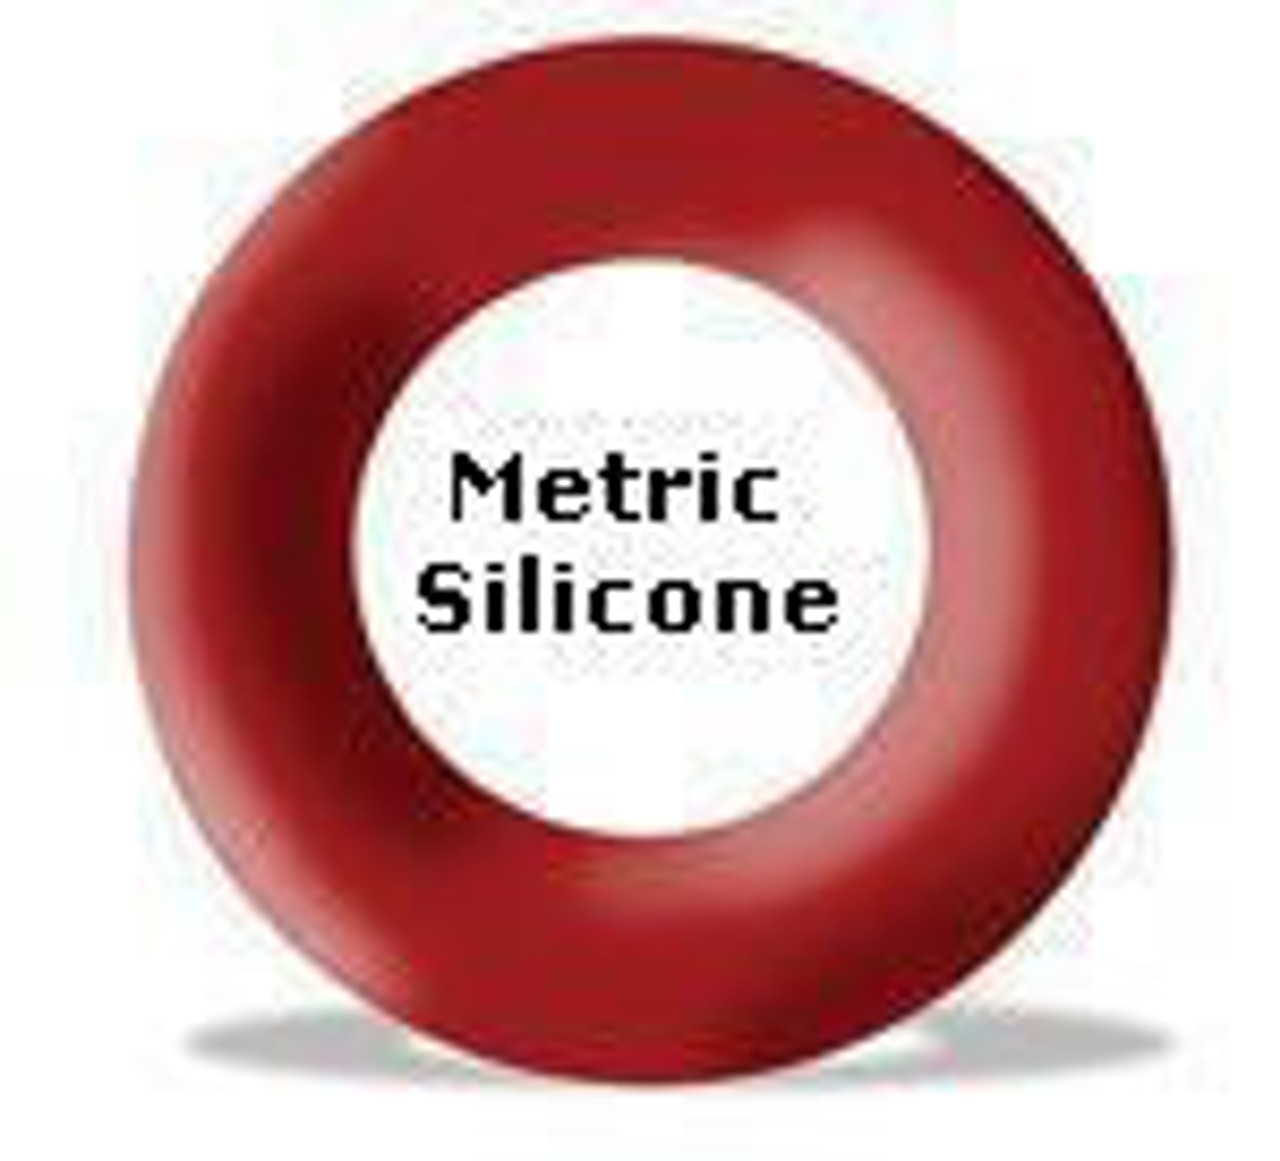 Silicone O-rings 142.24 x 6.99mm Price for 1 pc